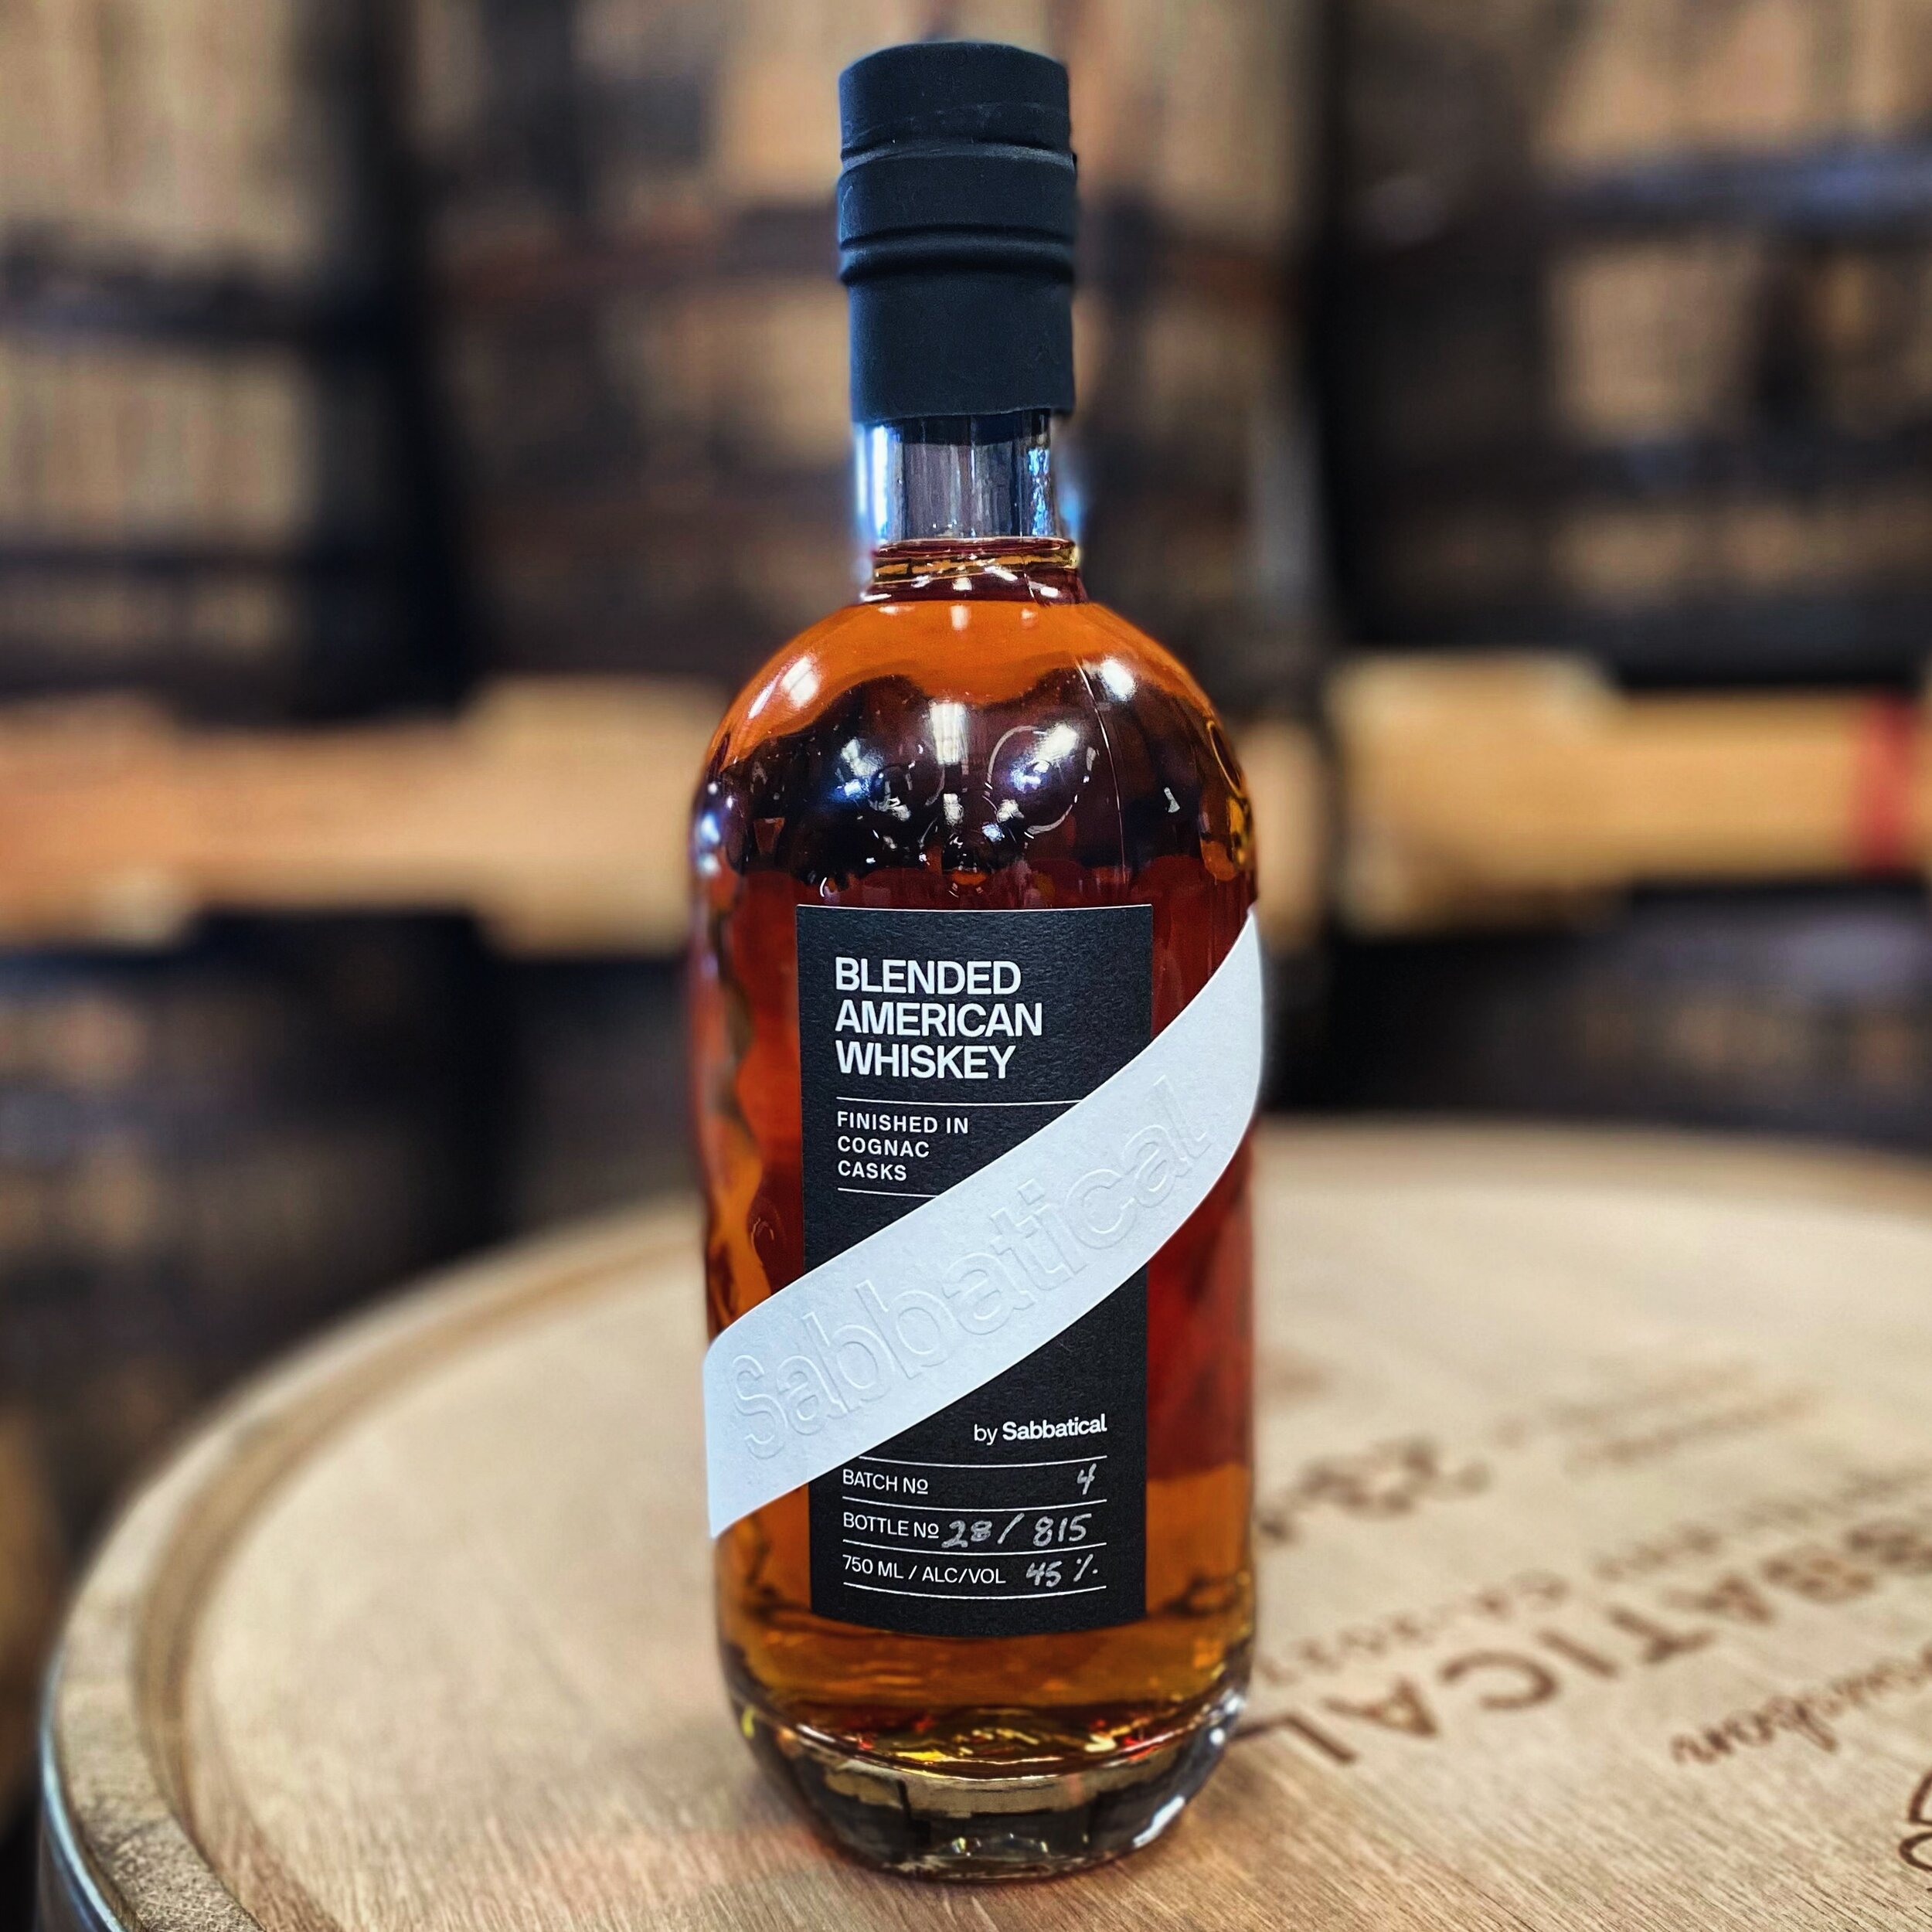 &iexcl;New Release! 
New batch, new look, new proof point, new age statement, the same attention to detail. The next generation of this award-winning 🏅 sold out whiskey expression has arrived and is ready to enjoy! 

Batch No.4️⃣ of our Blended 🇺🇸